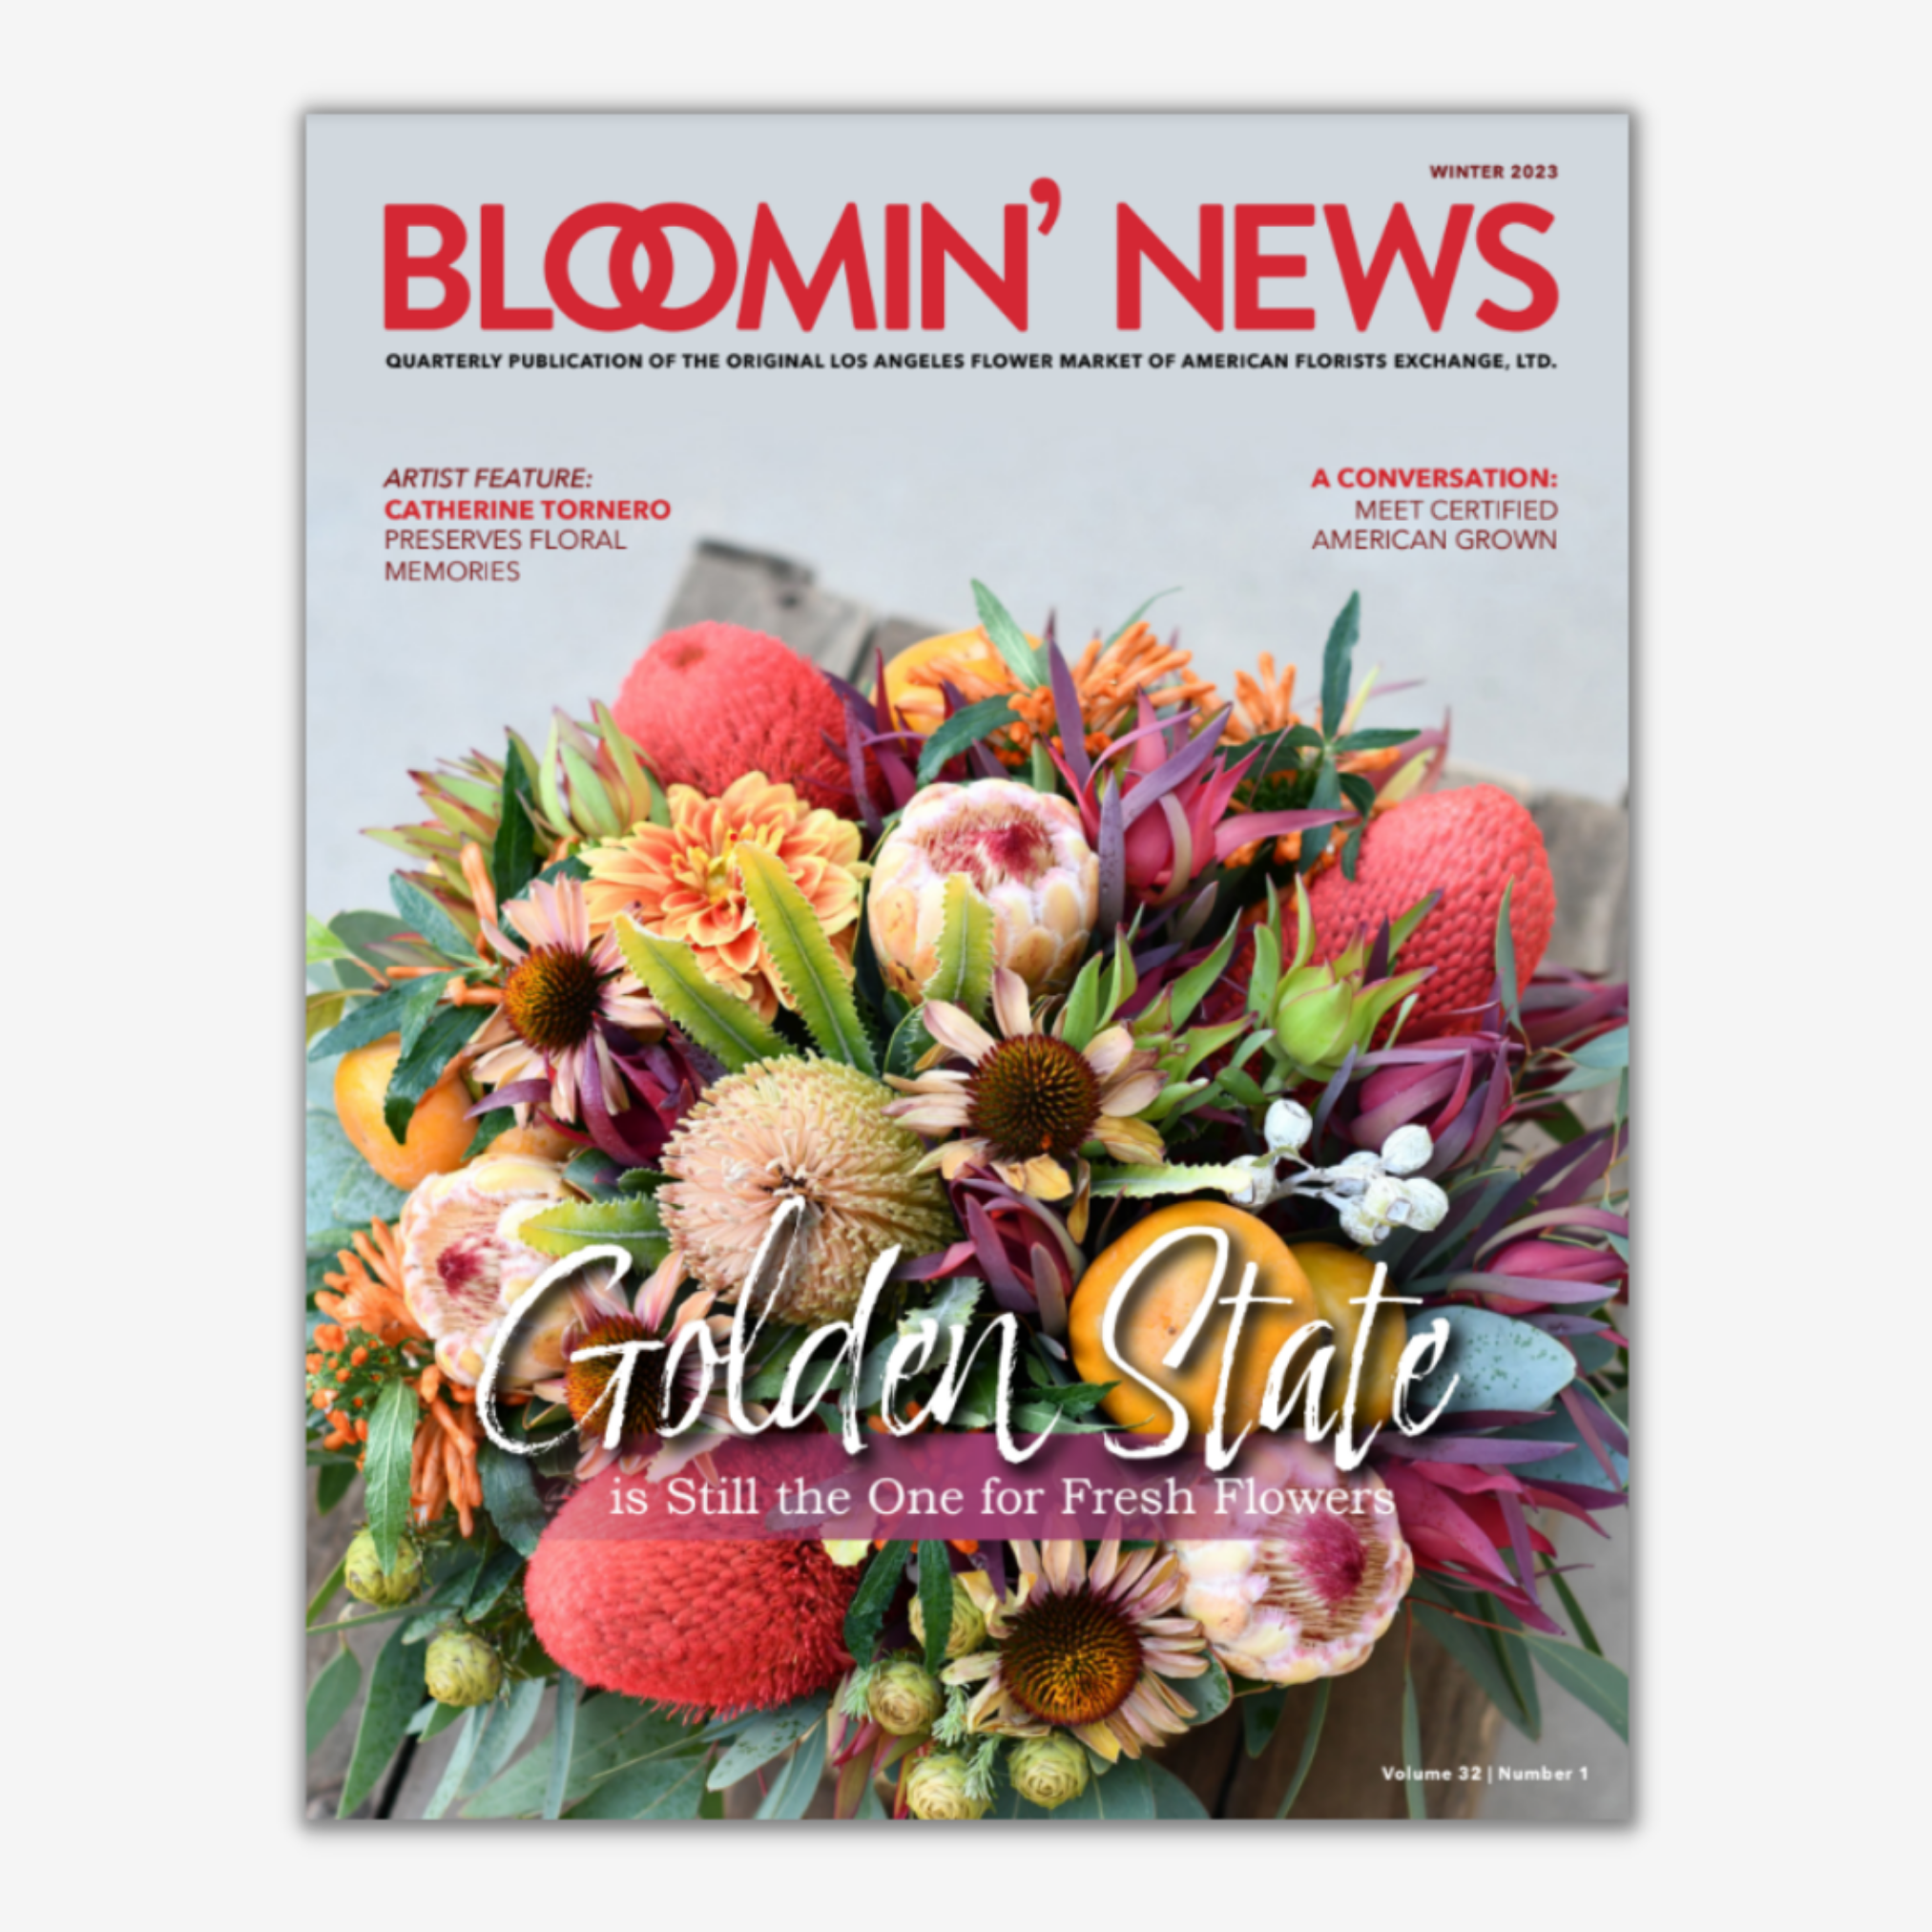 Bloomin New Winter 2023 Cover with Flower Arrangement